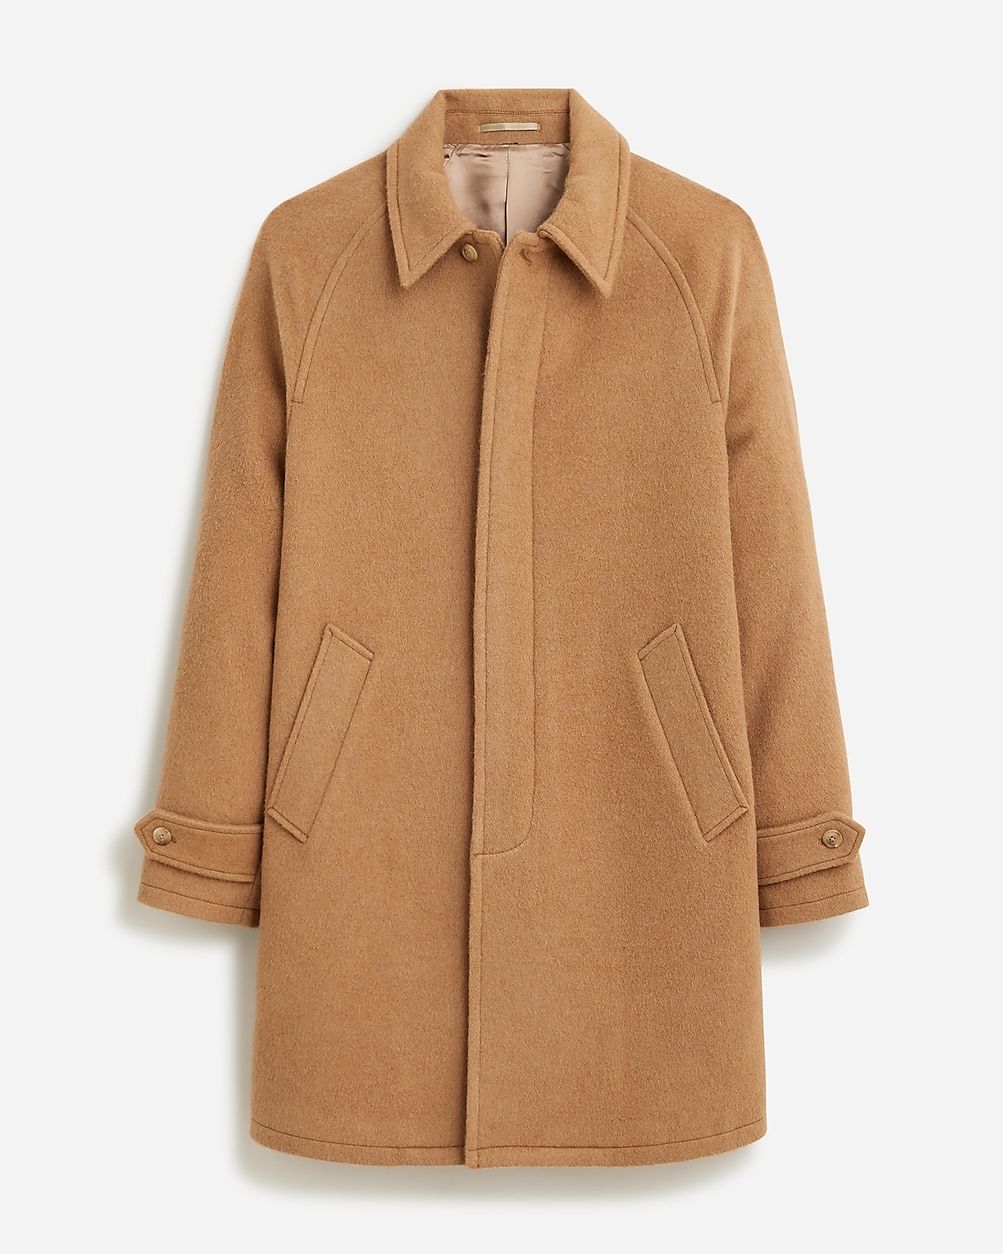 Limited-edition Ludlow car coat in English camel hair | J.Crew US